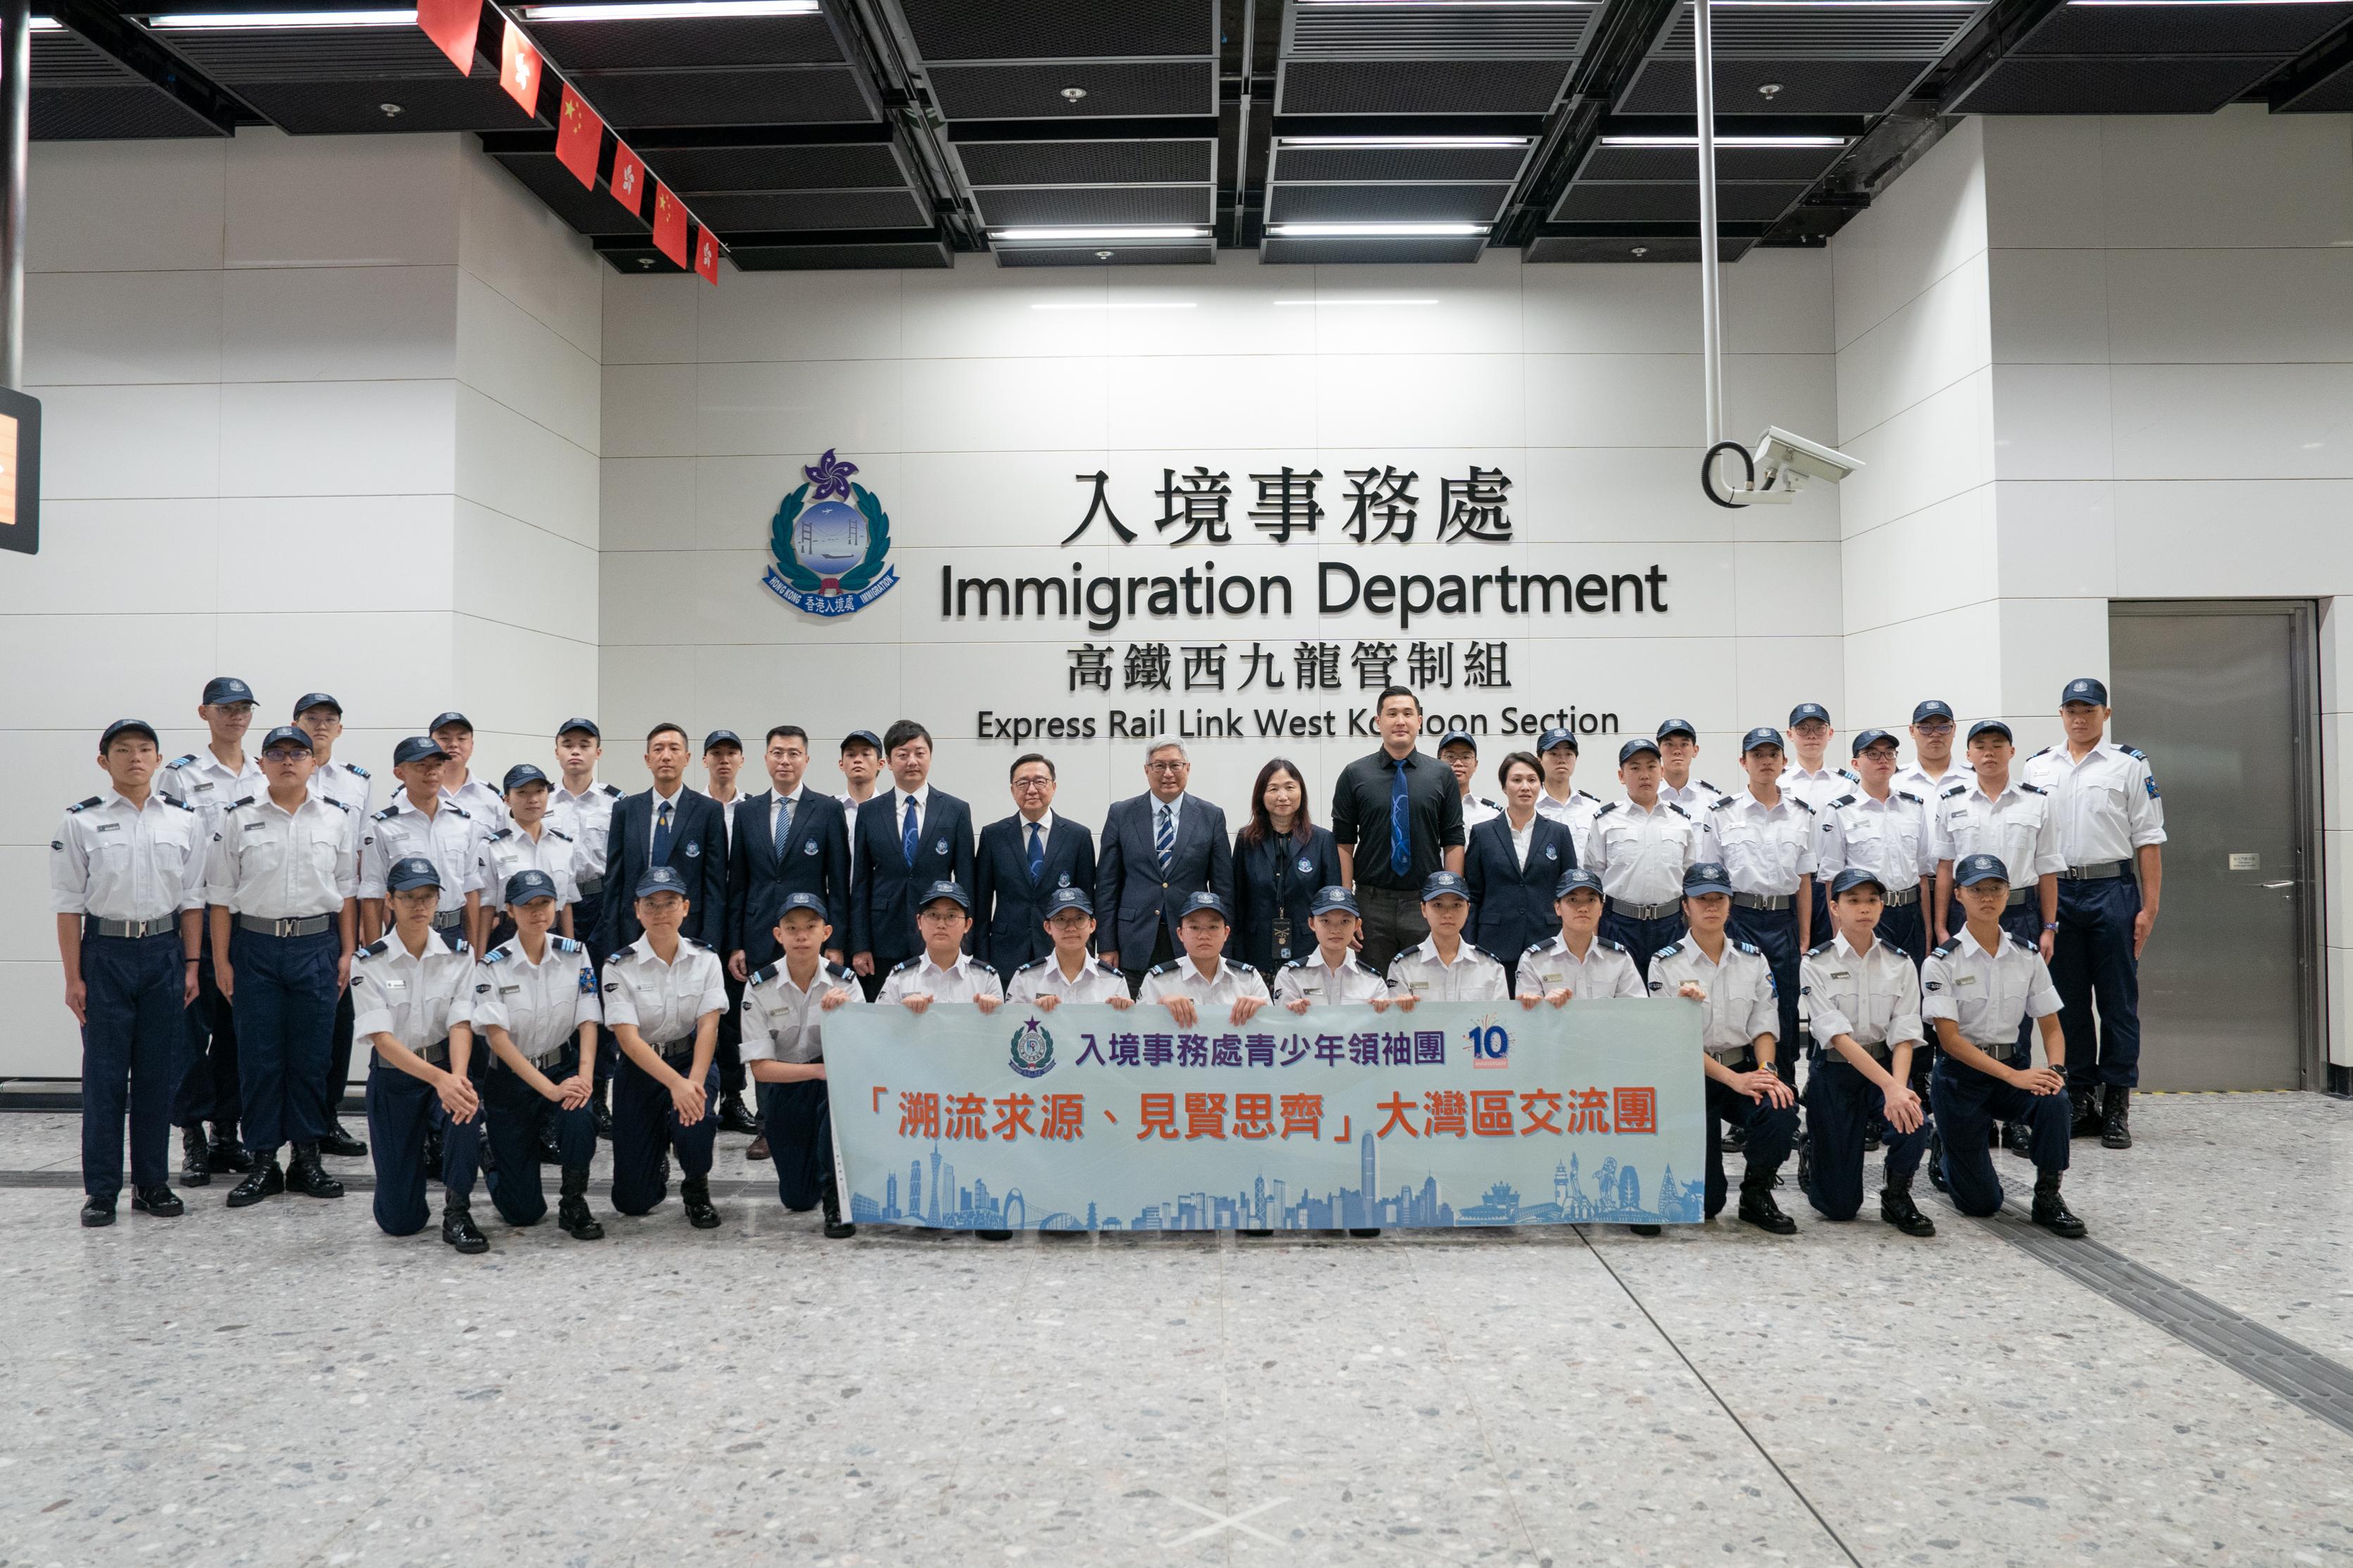 The Immigration Department Youth Leaders Corps (IDYL) organised a summer exchange tour to the Greater Bay Area from July 24 to 26, 2023.  Photo shows 34 members of the IDYL, led by the Director of Immigration, Mr Au Ka-wang, (second row, eighth right), the Commissioner of the IDYL, Dr Cheng Kam-chung, (second row, eighth left), and three Deputy Commissioners of the IDYL, setting off the tour at the Express Rail Link West Kowloon station.